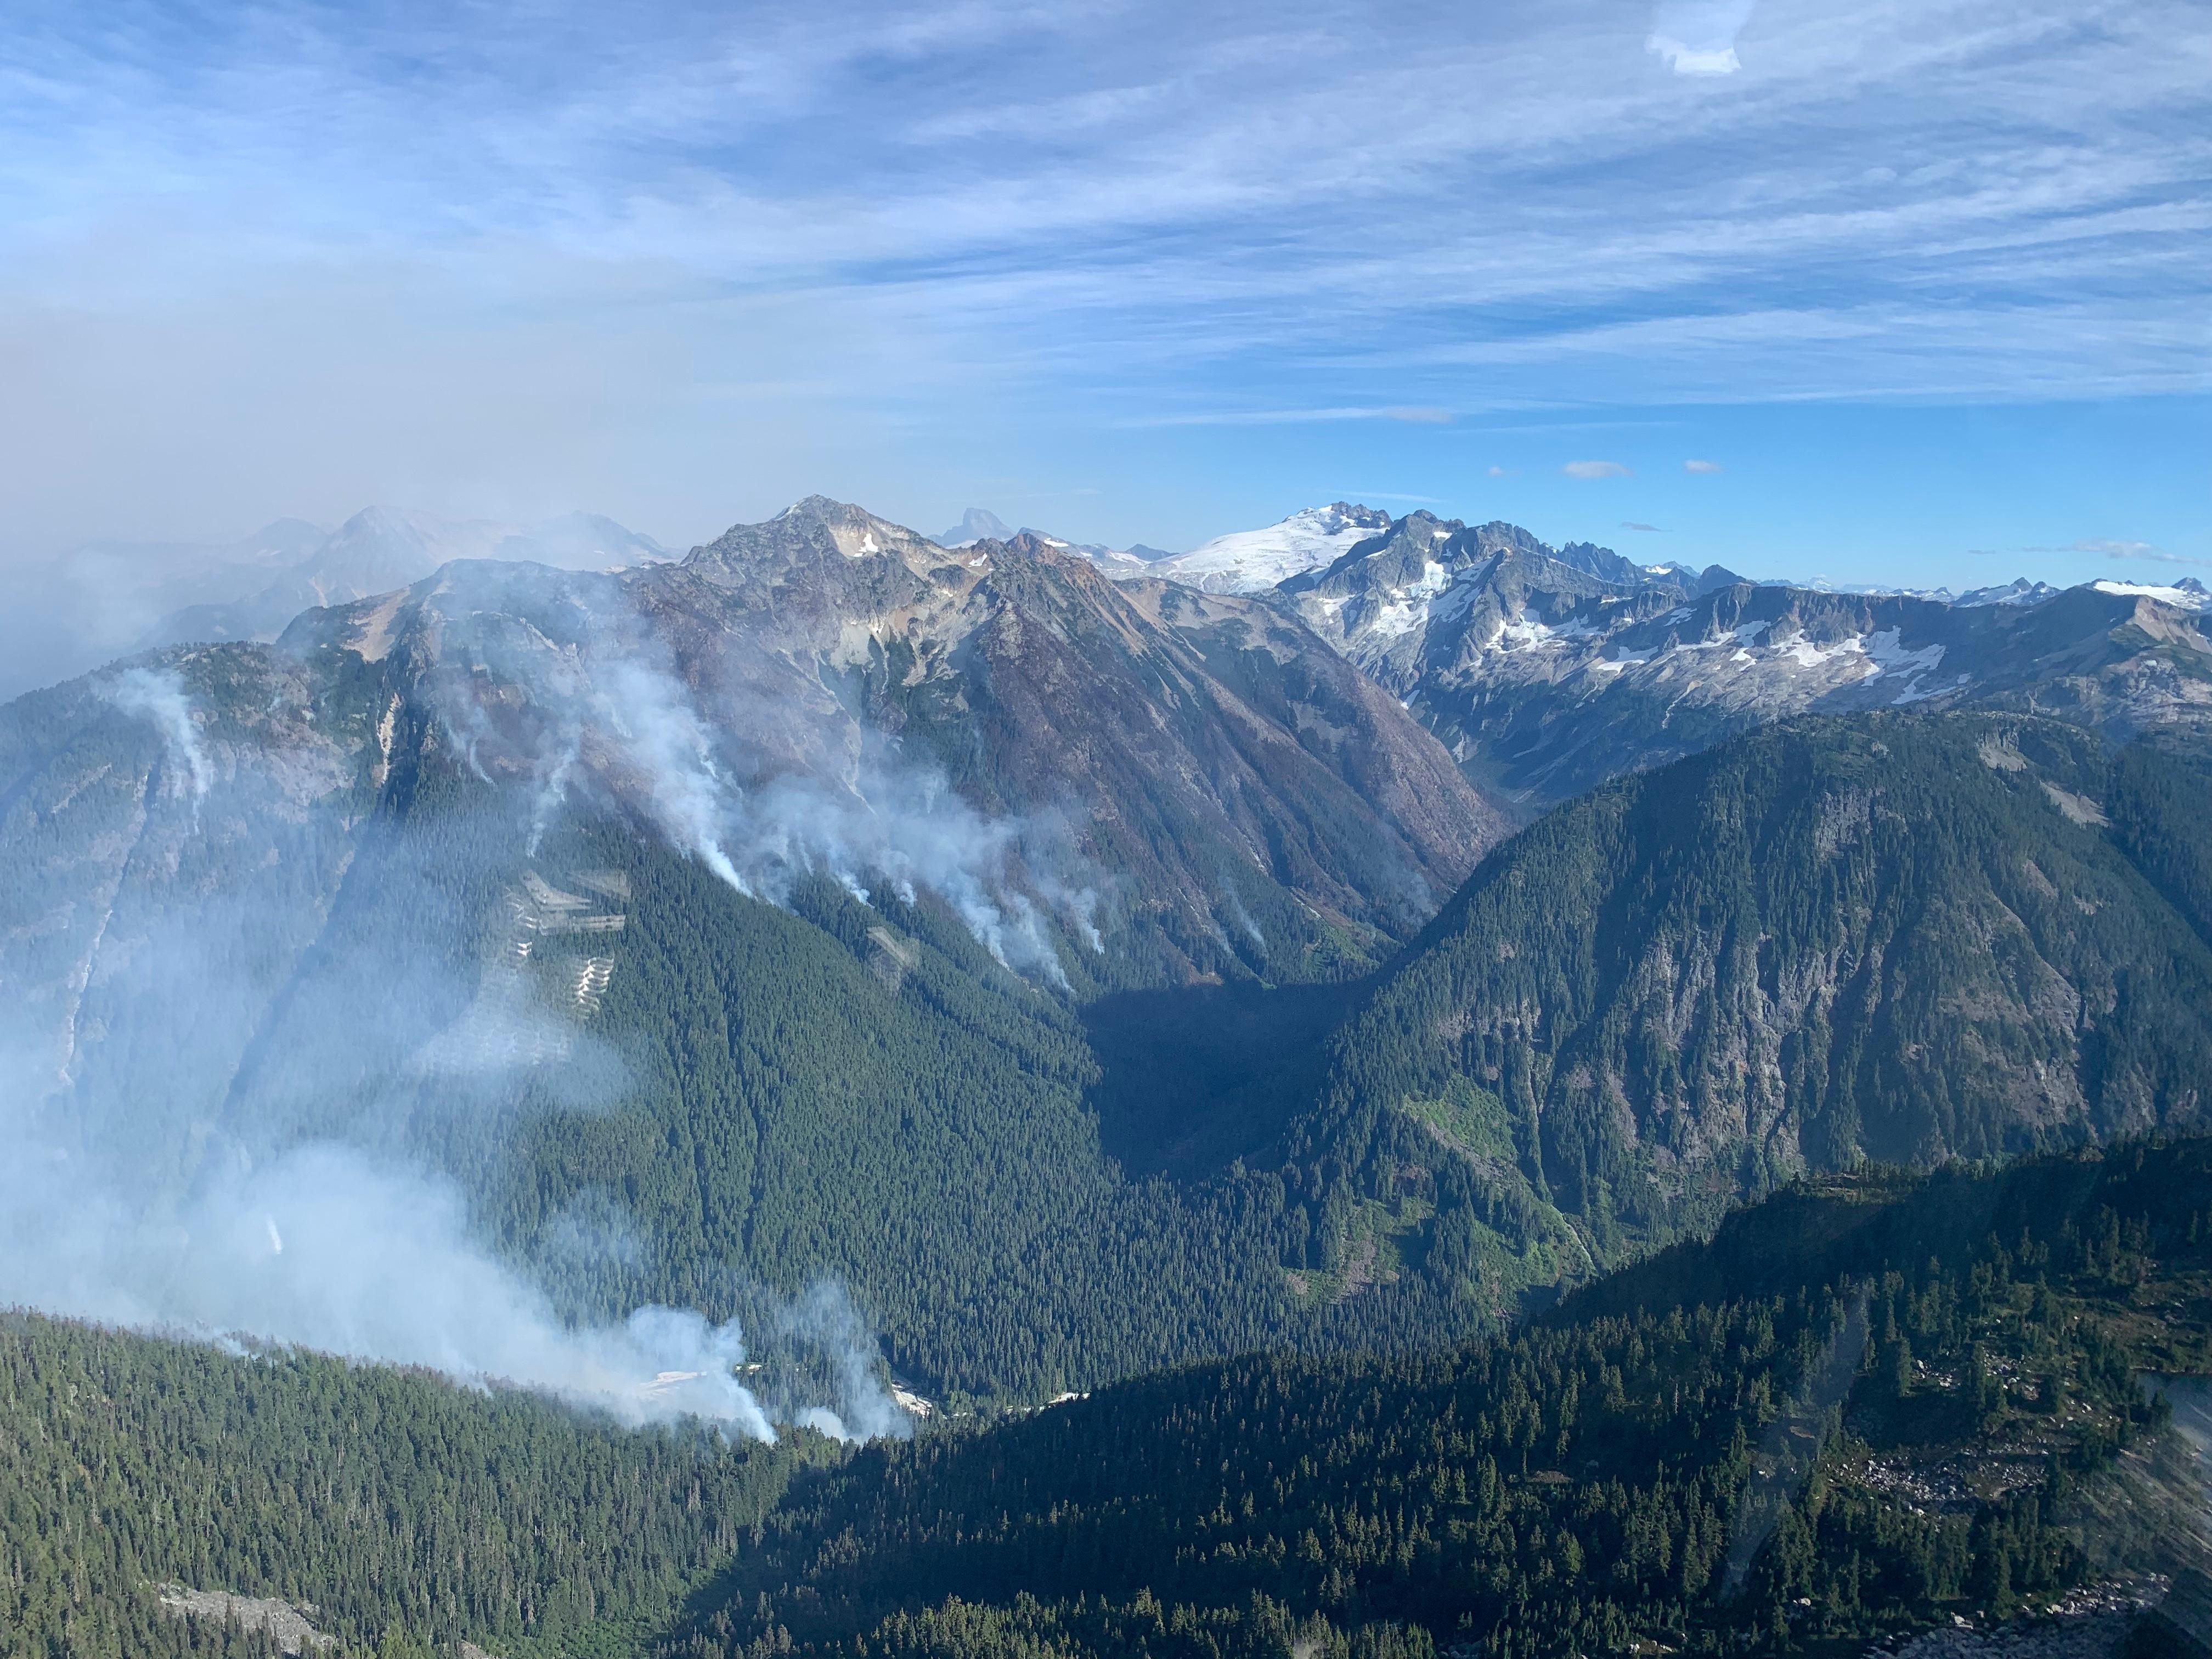 A number of white wispy smoke plumes rising off very steep terrain.